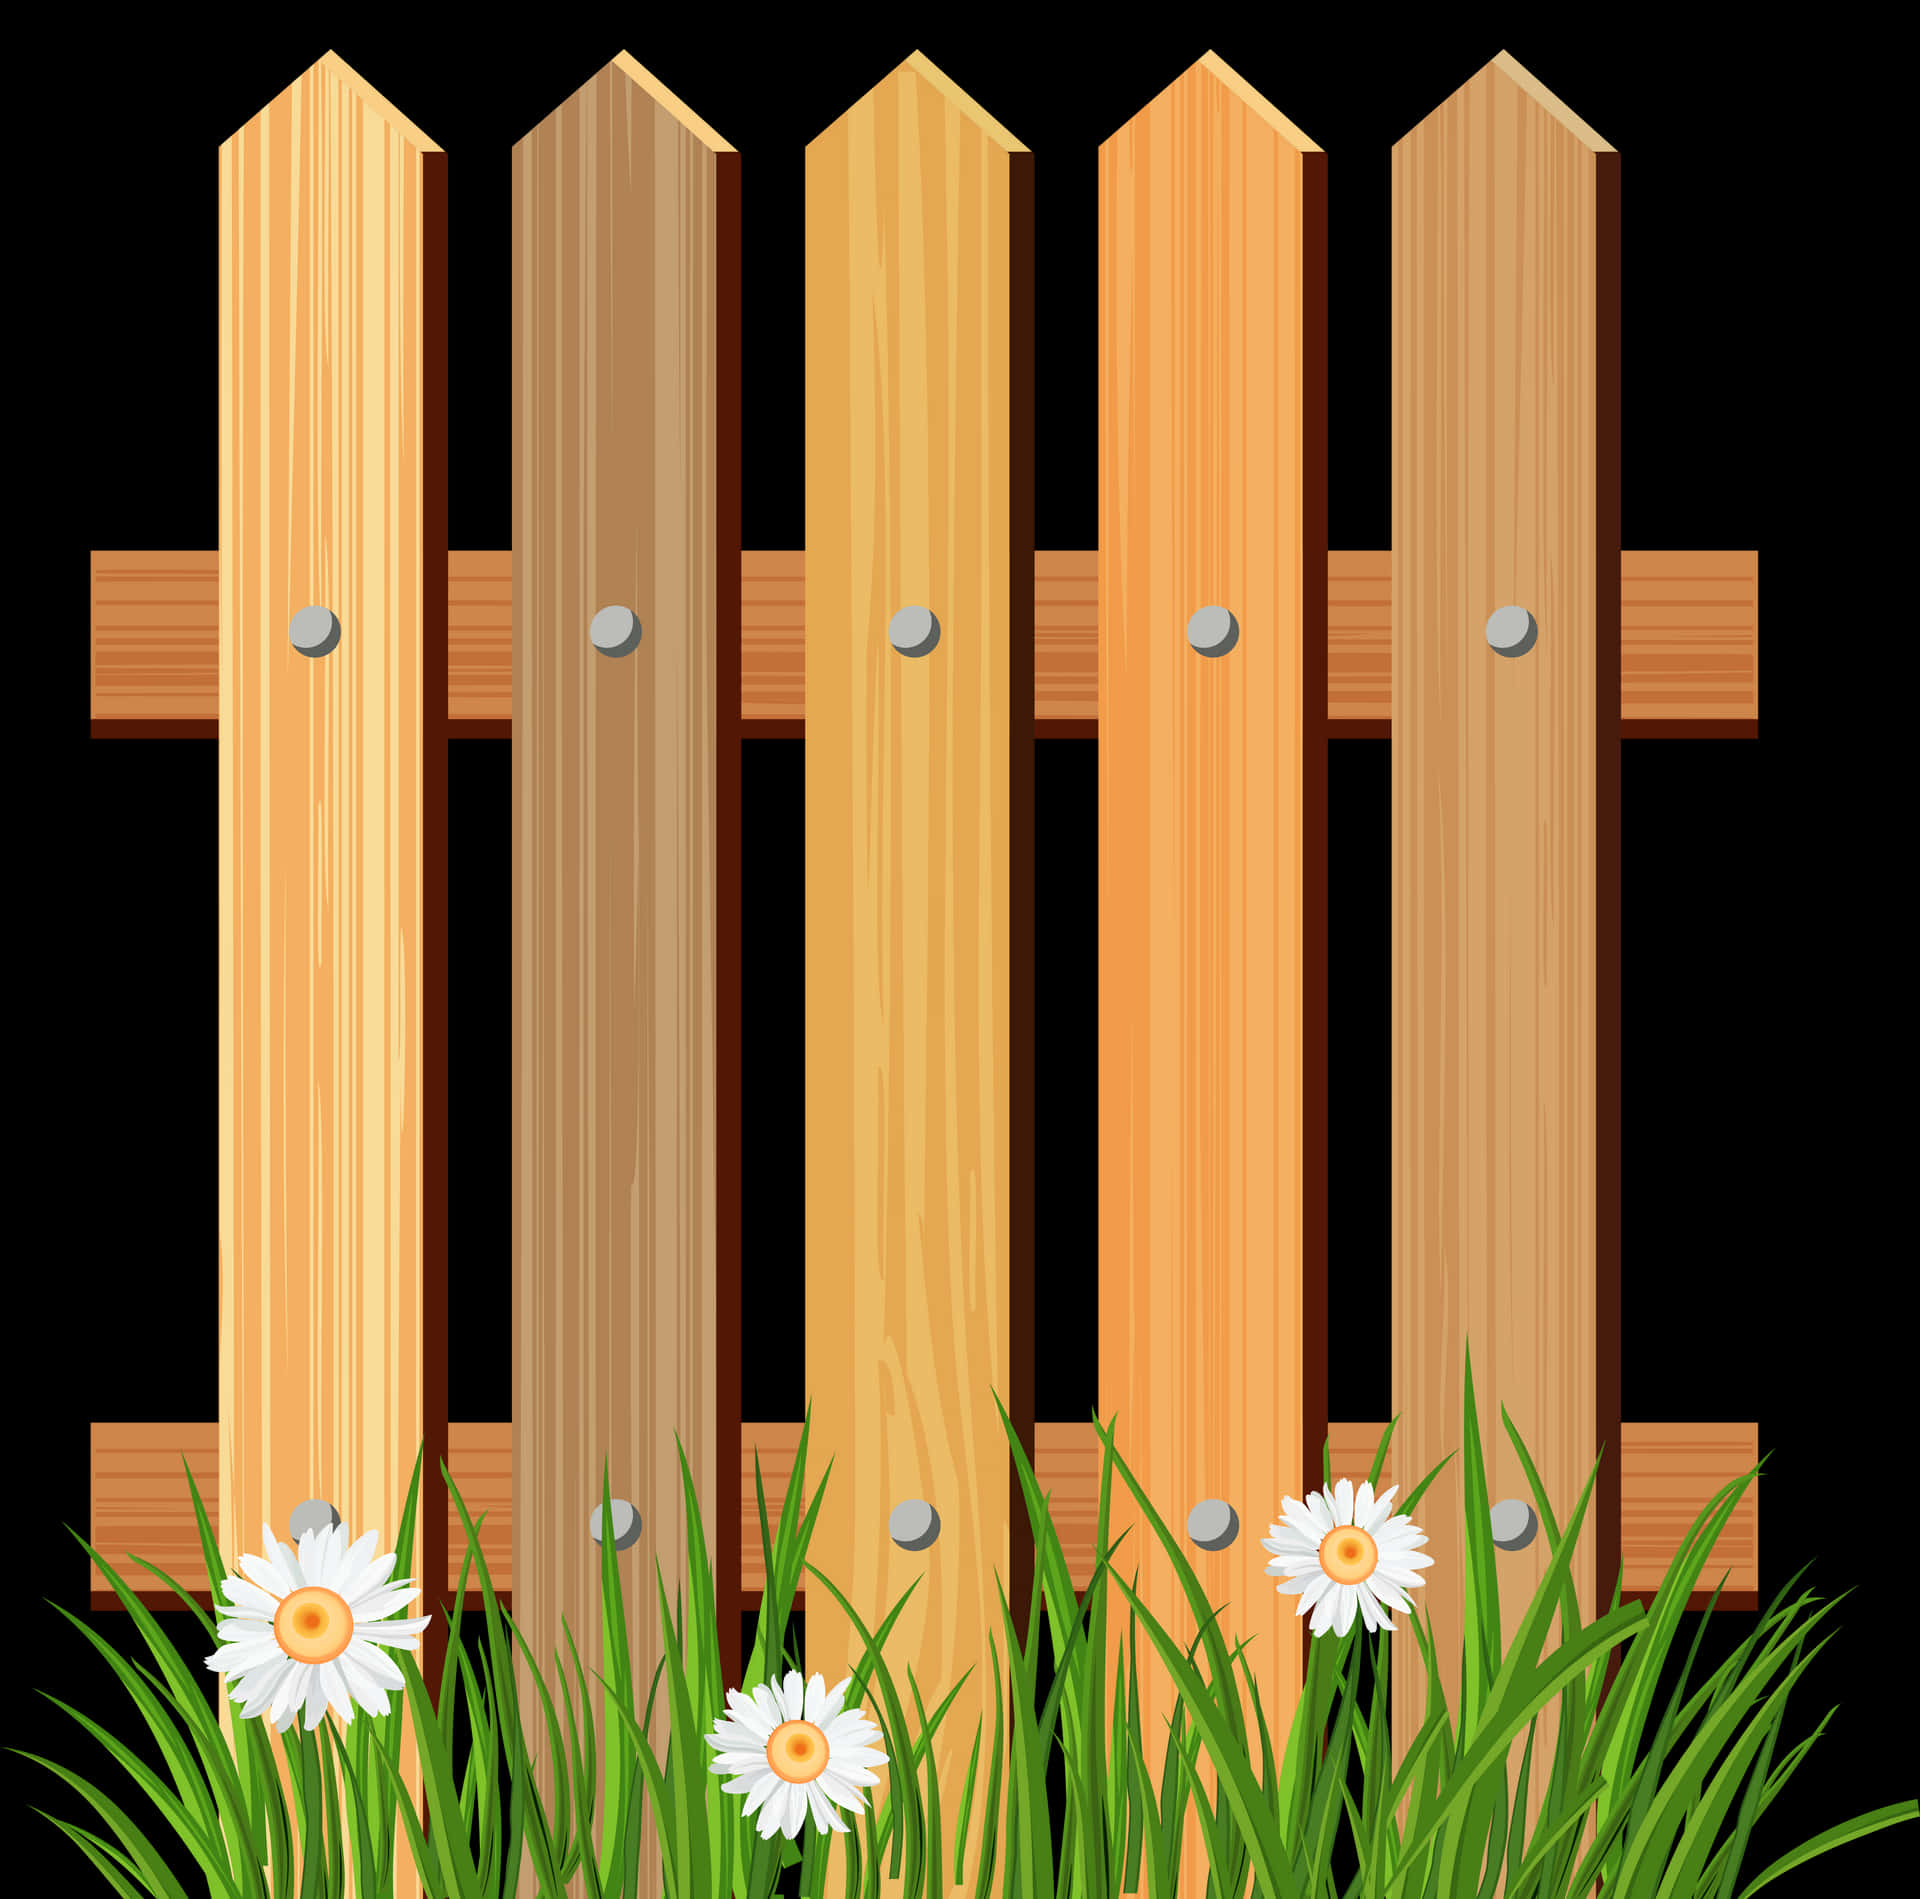 Wooden Fence With Grass And Daisies